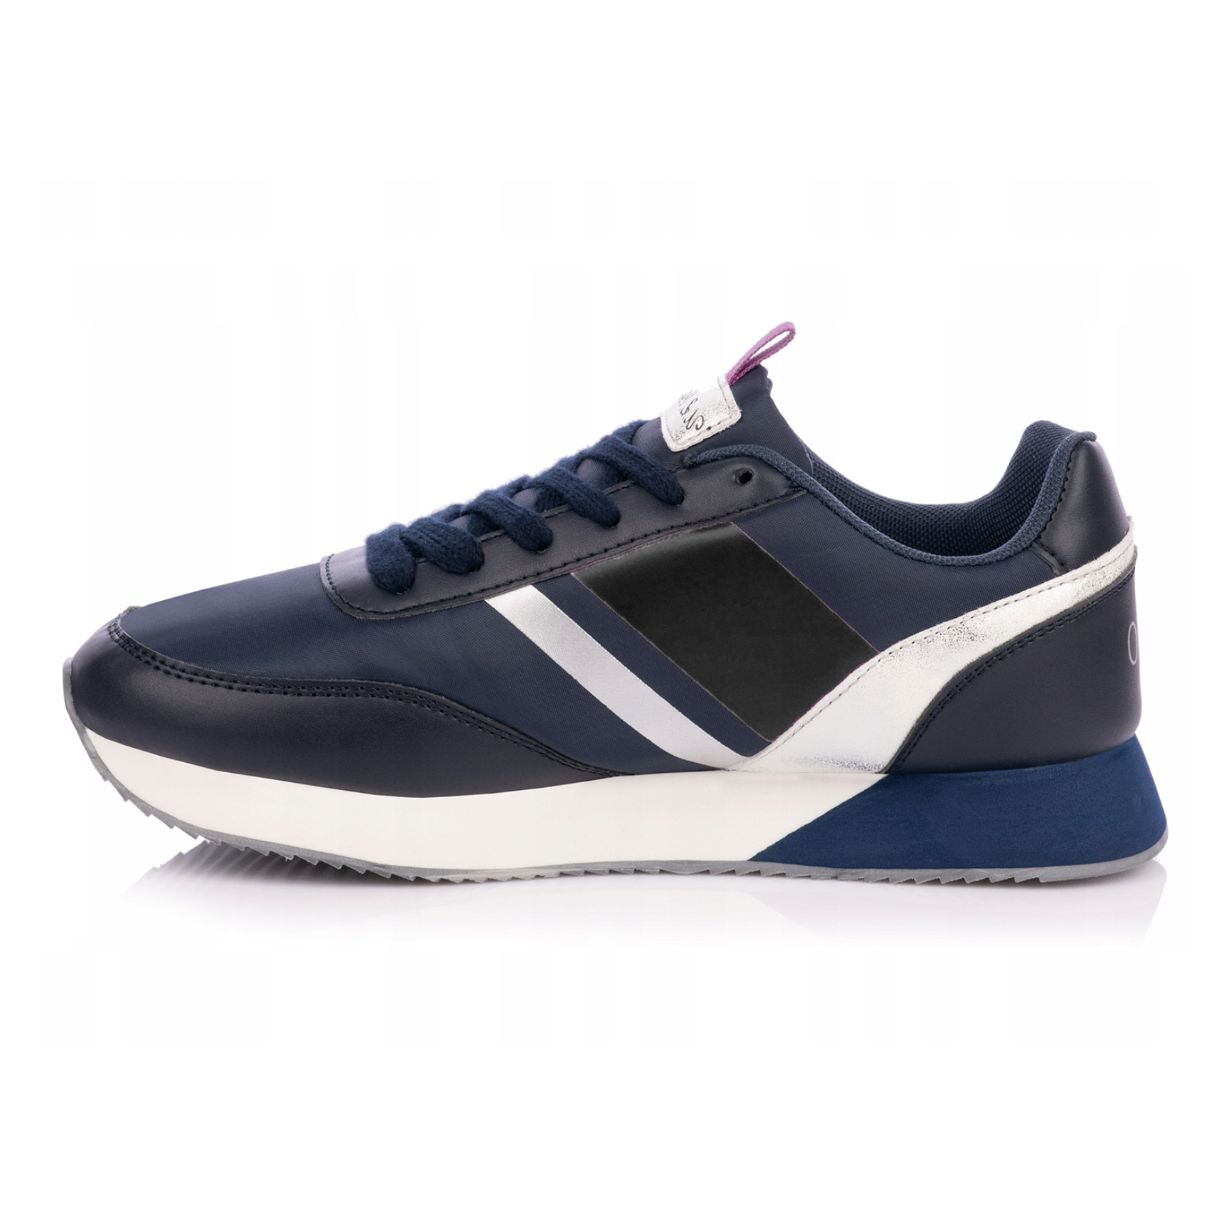 U.S. POLO ASSN. Eco Chic Blue Sneakers with Metallic Accents